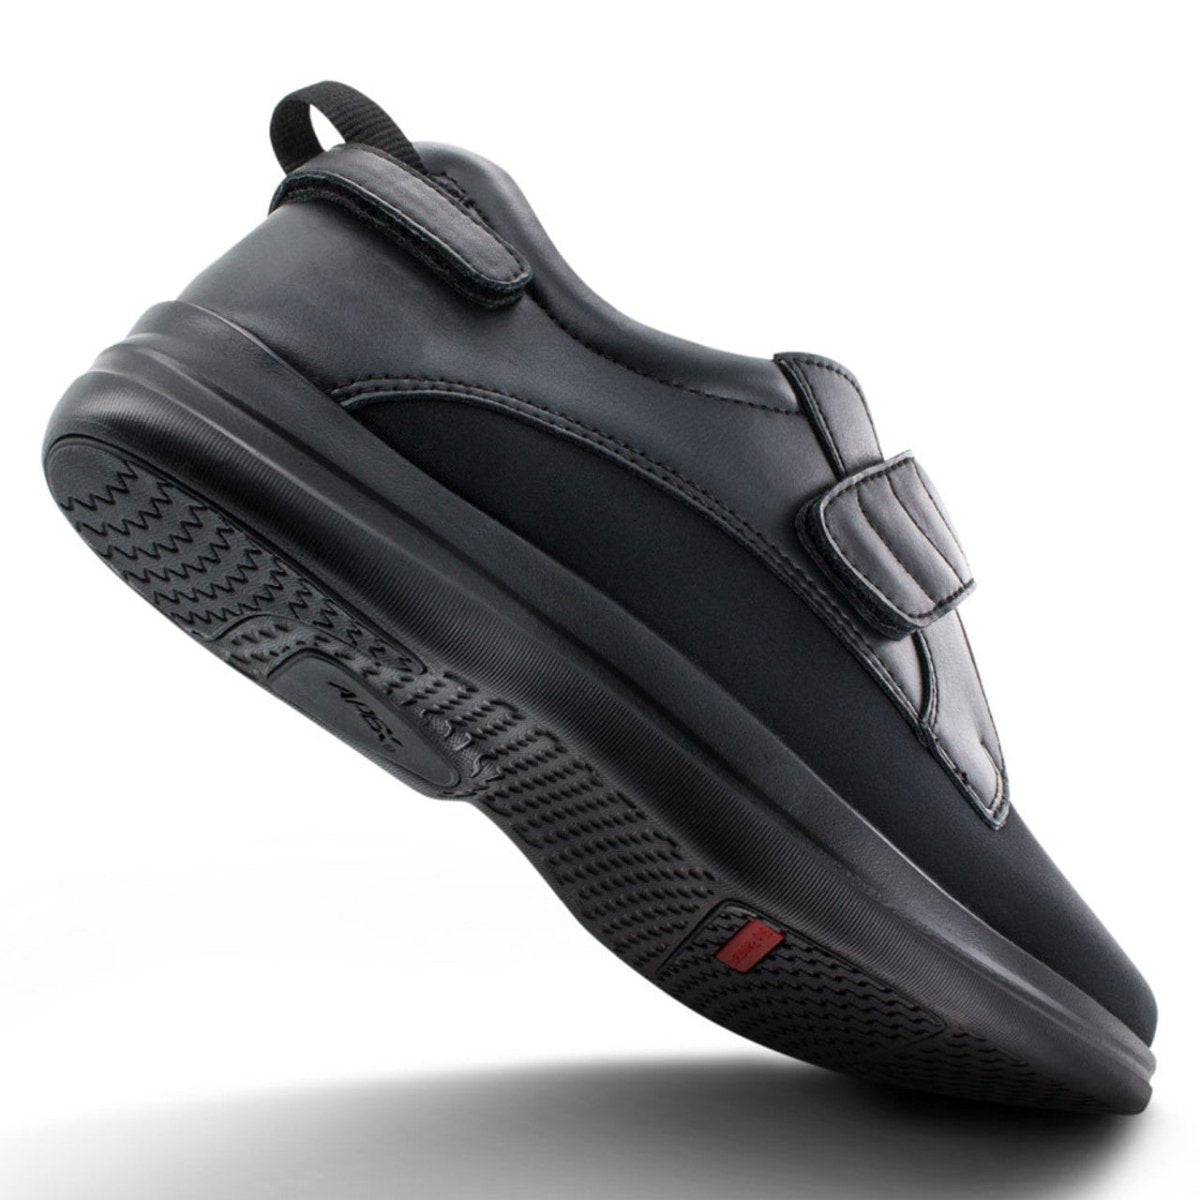 APEX A3200M ABS STRETCH MEN'S BALANCE SHOE IN BLACK - TLW Shoes